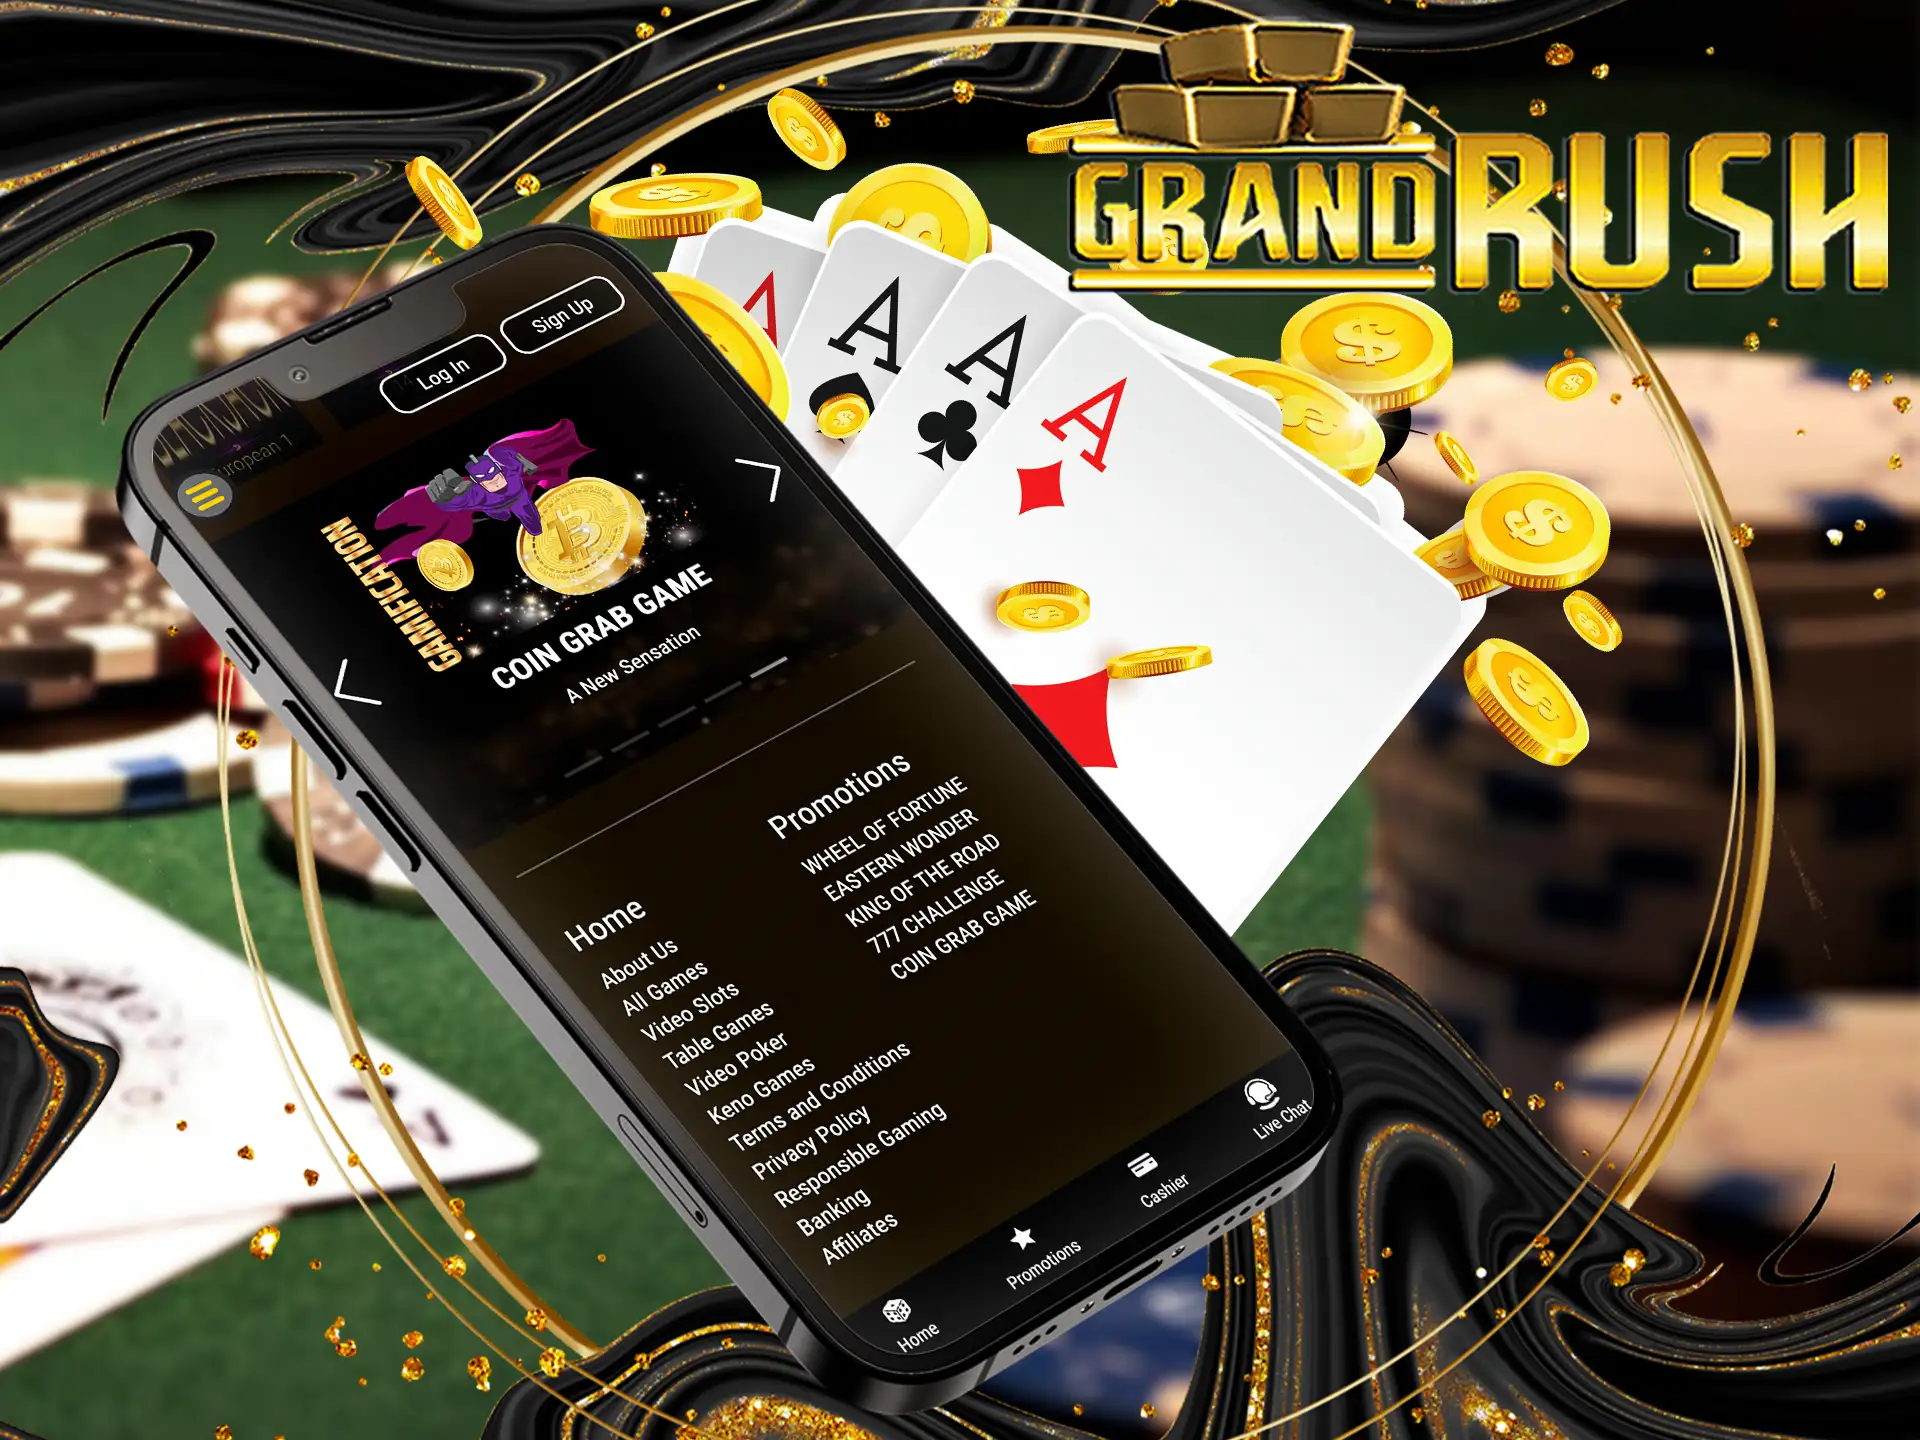 Grand Rush offers the best Baccarat games to bet on.